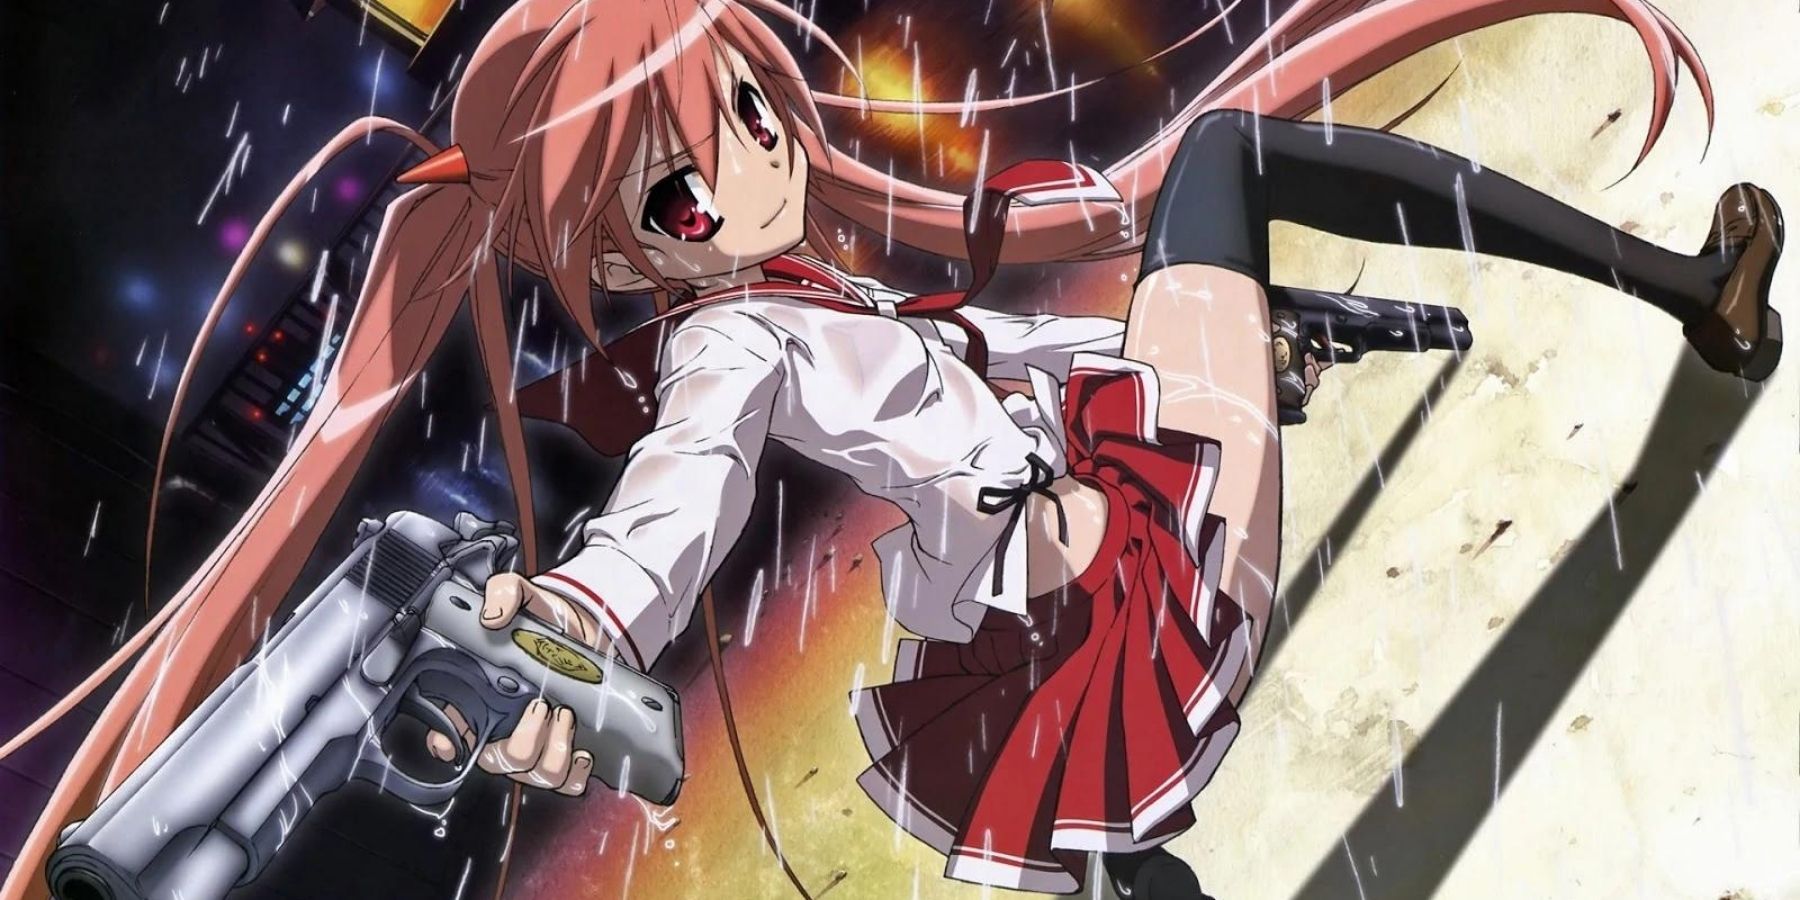 Aria Holmes Kanzaki And Her Two Colt Pistols And Short Swords (Aria The Scarlet Ammo)